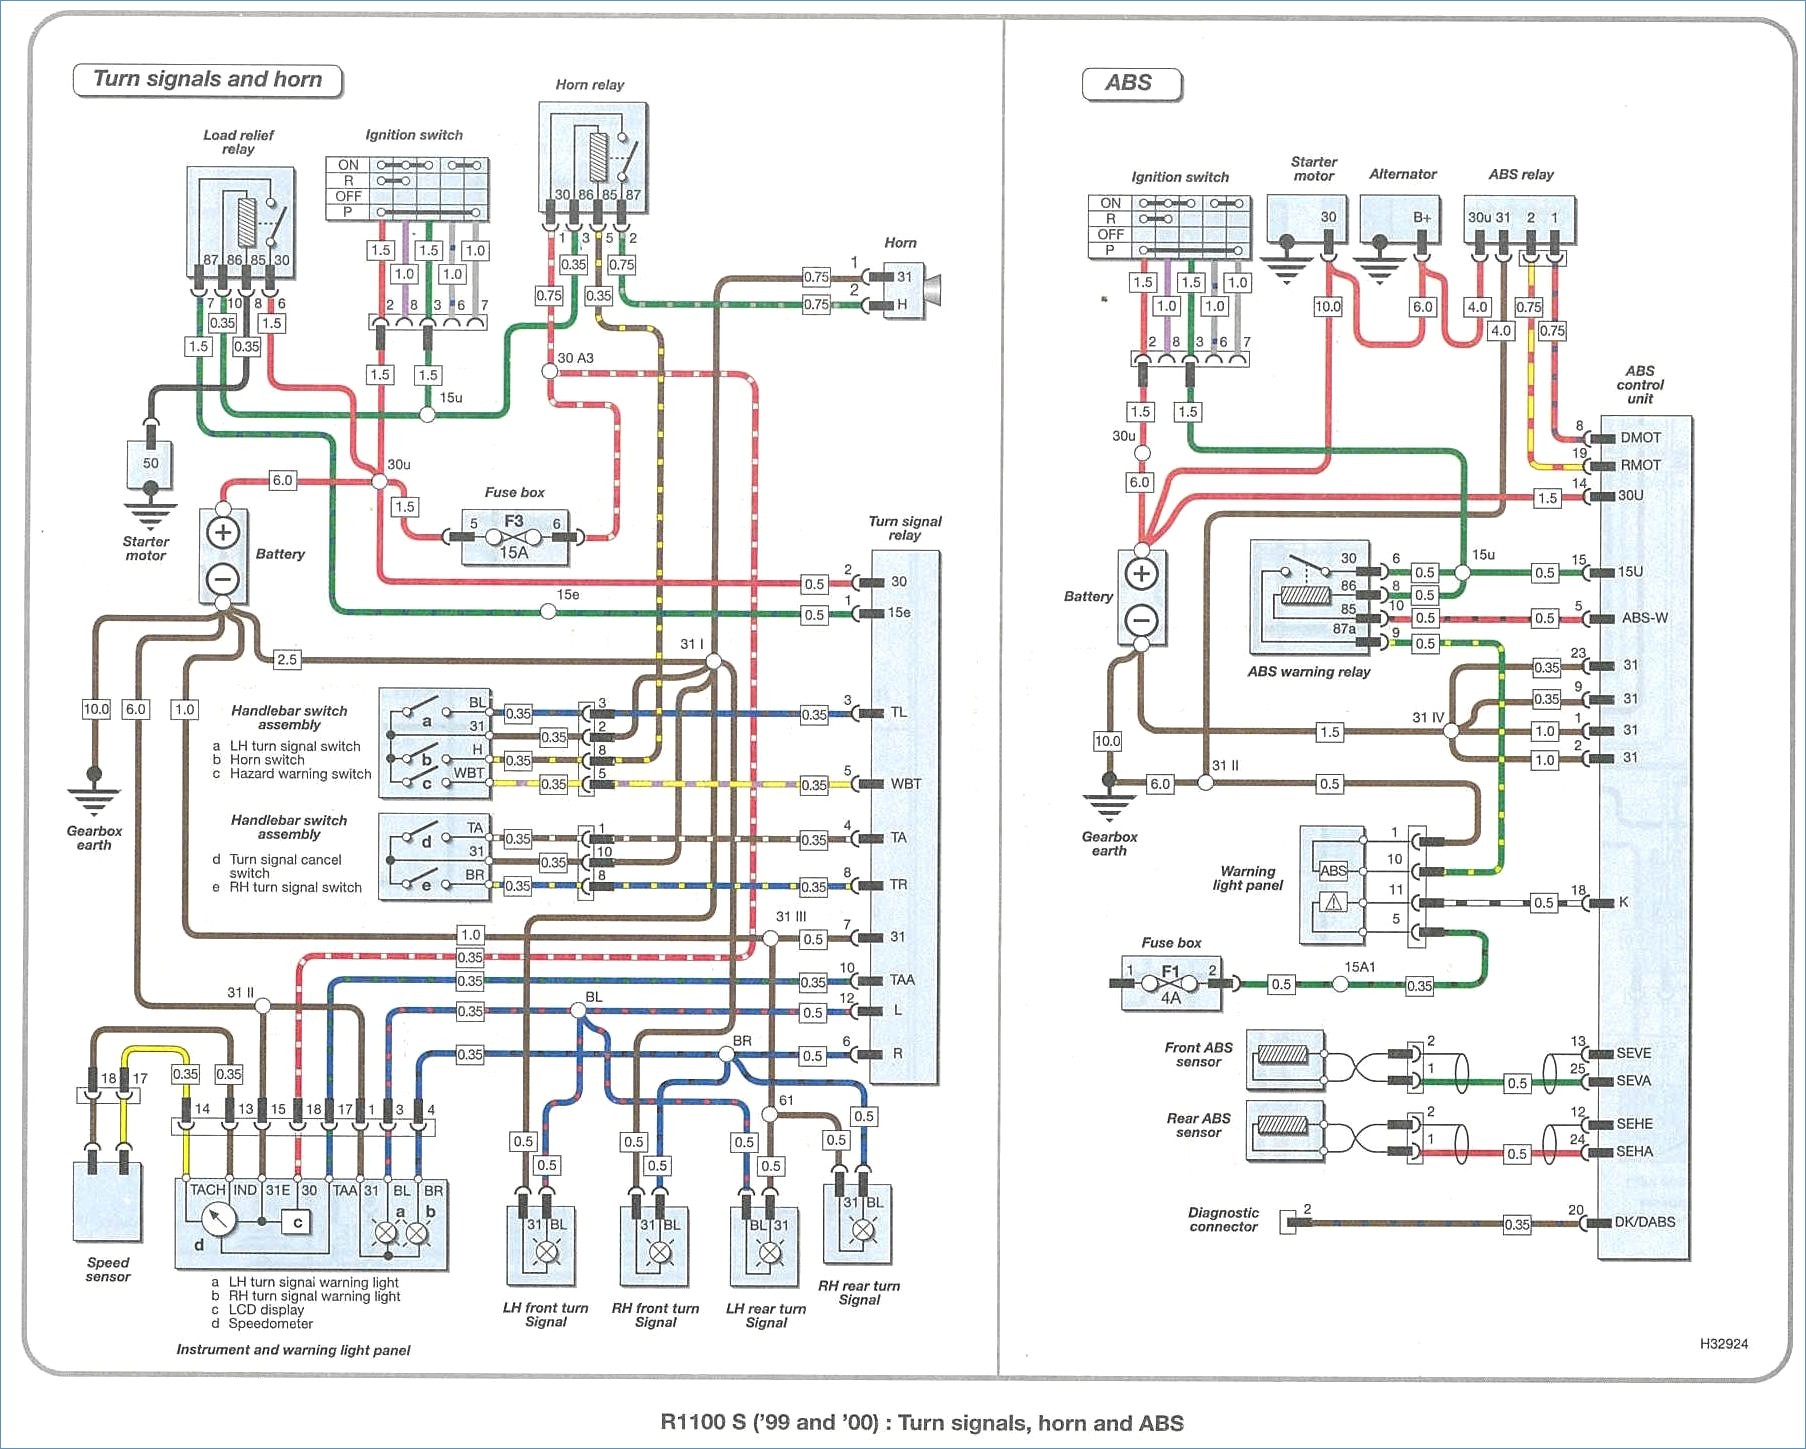 Unusual E39 Amplifier Wiring Diagram Gallery The Best Electrical